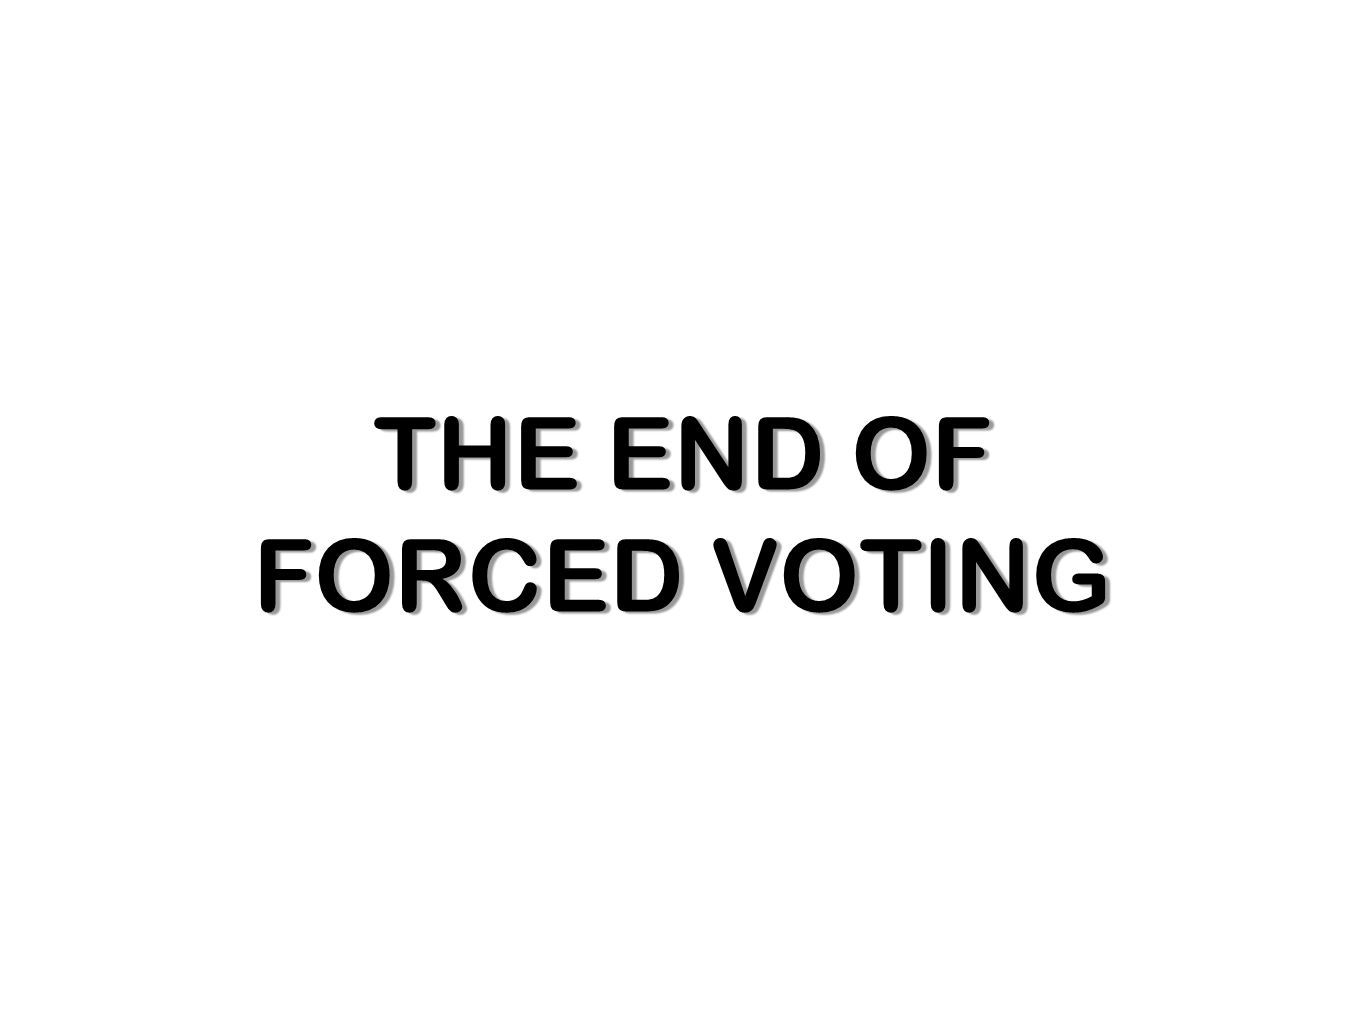 THE END OF FORCED VOTING